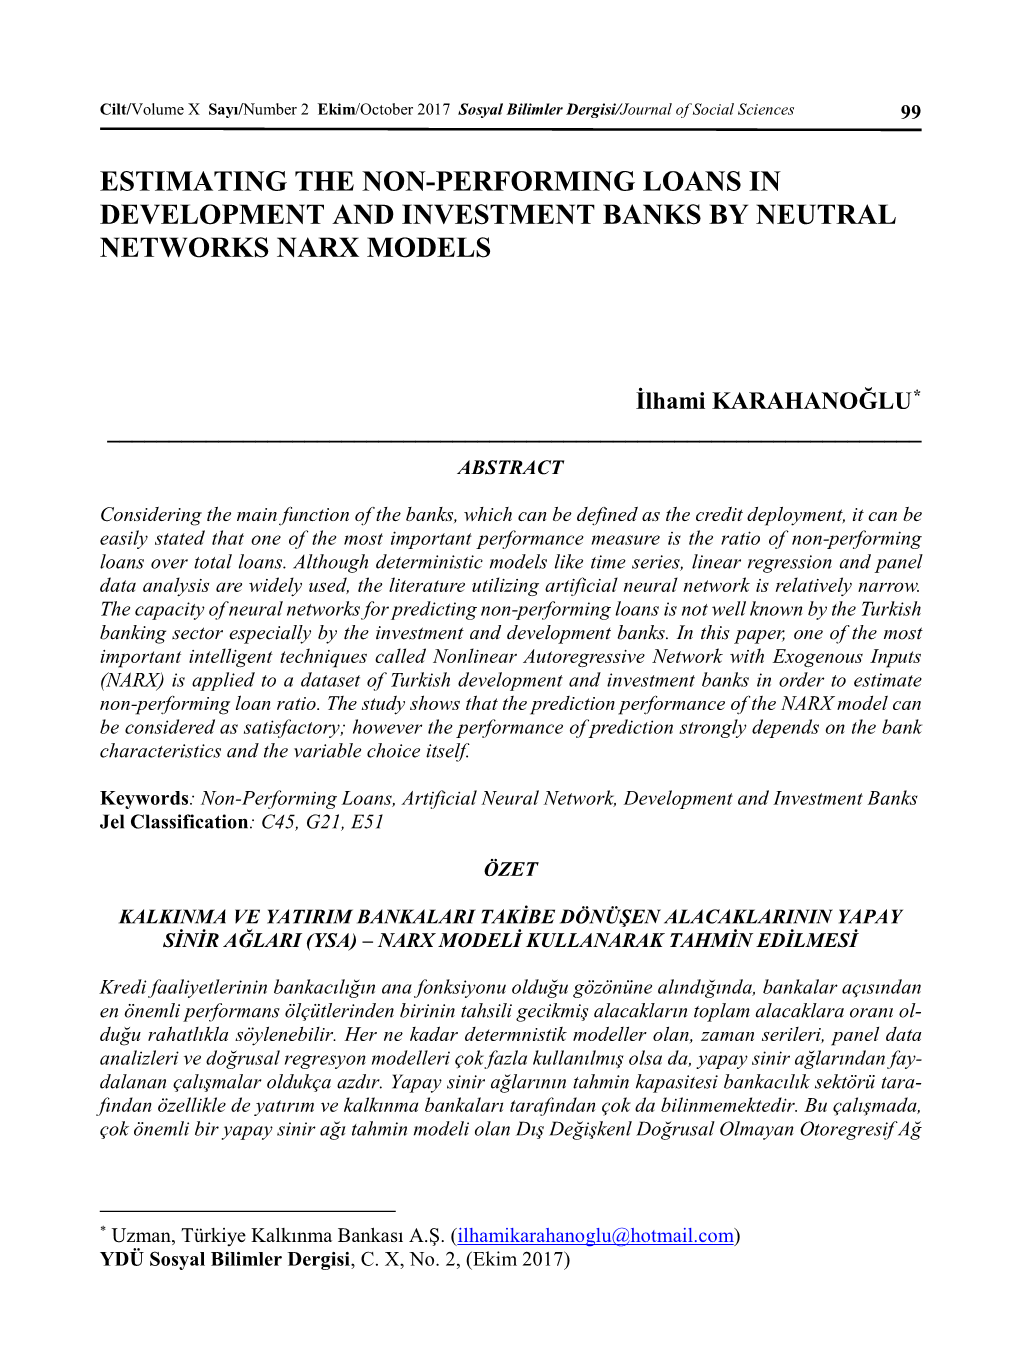 Estimating the Non-Performing Loans in Development and Investment Banks by Neutral Networks Narx Models